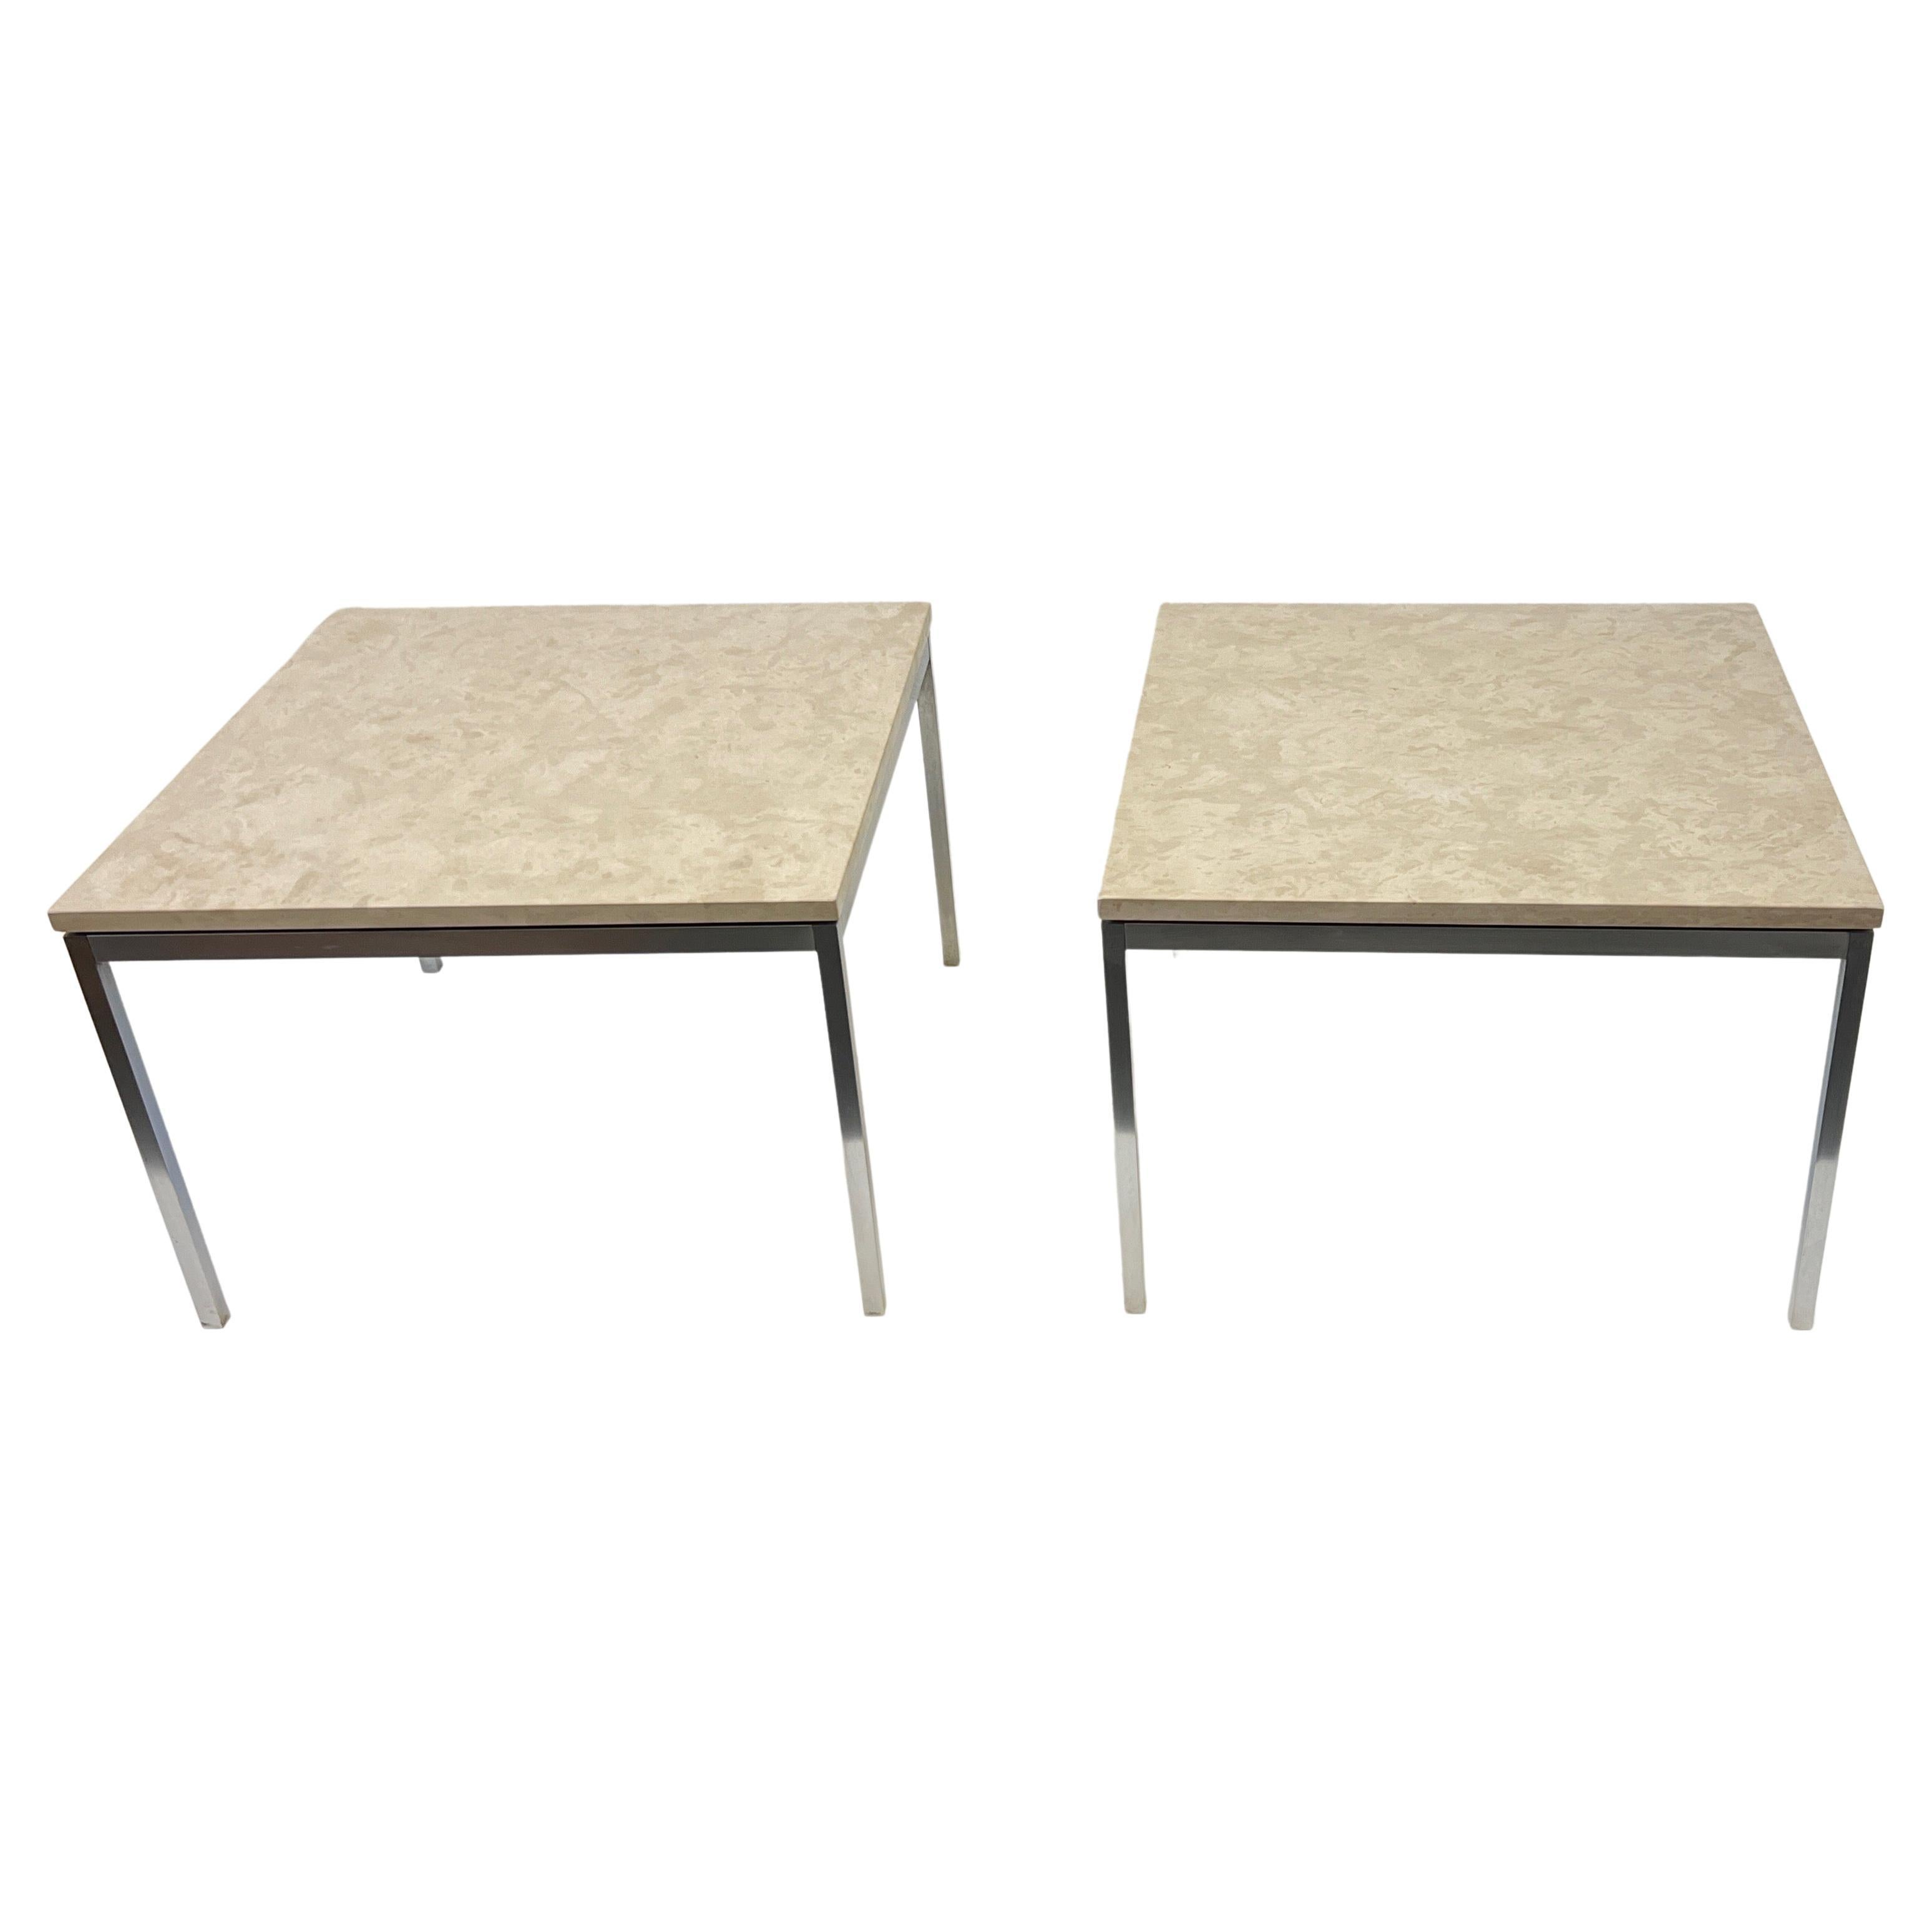 Pair of Brush stainless Steel and Granite Side Tables by Florence Knoll For Sale